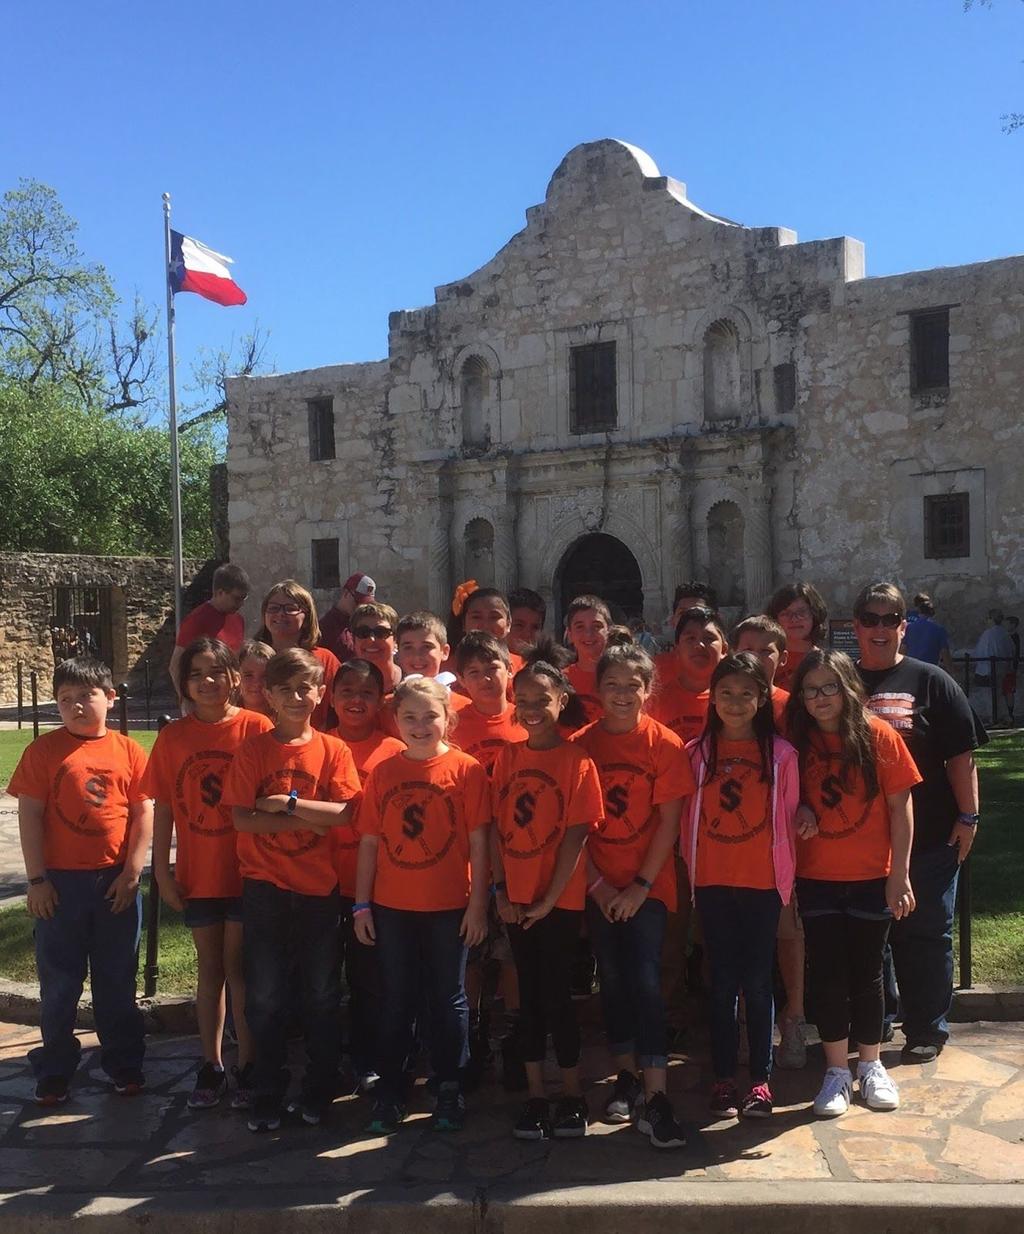 visiting the Mission, but they could also answer the questions our tour guide was asking about the Alamo.